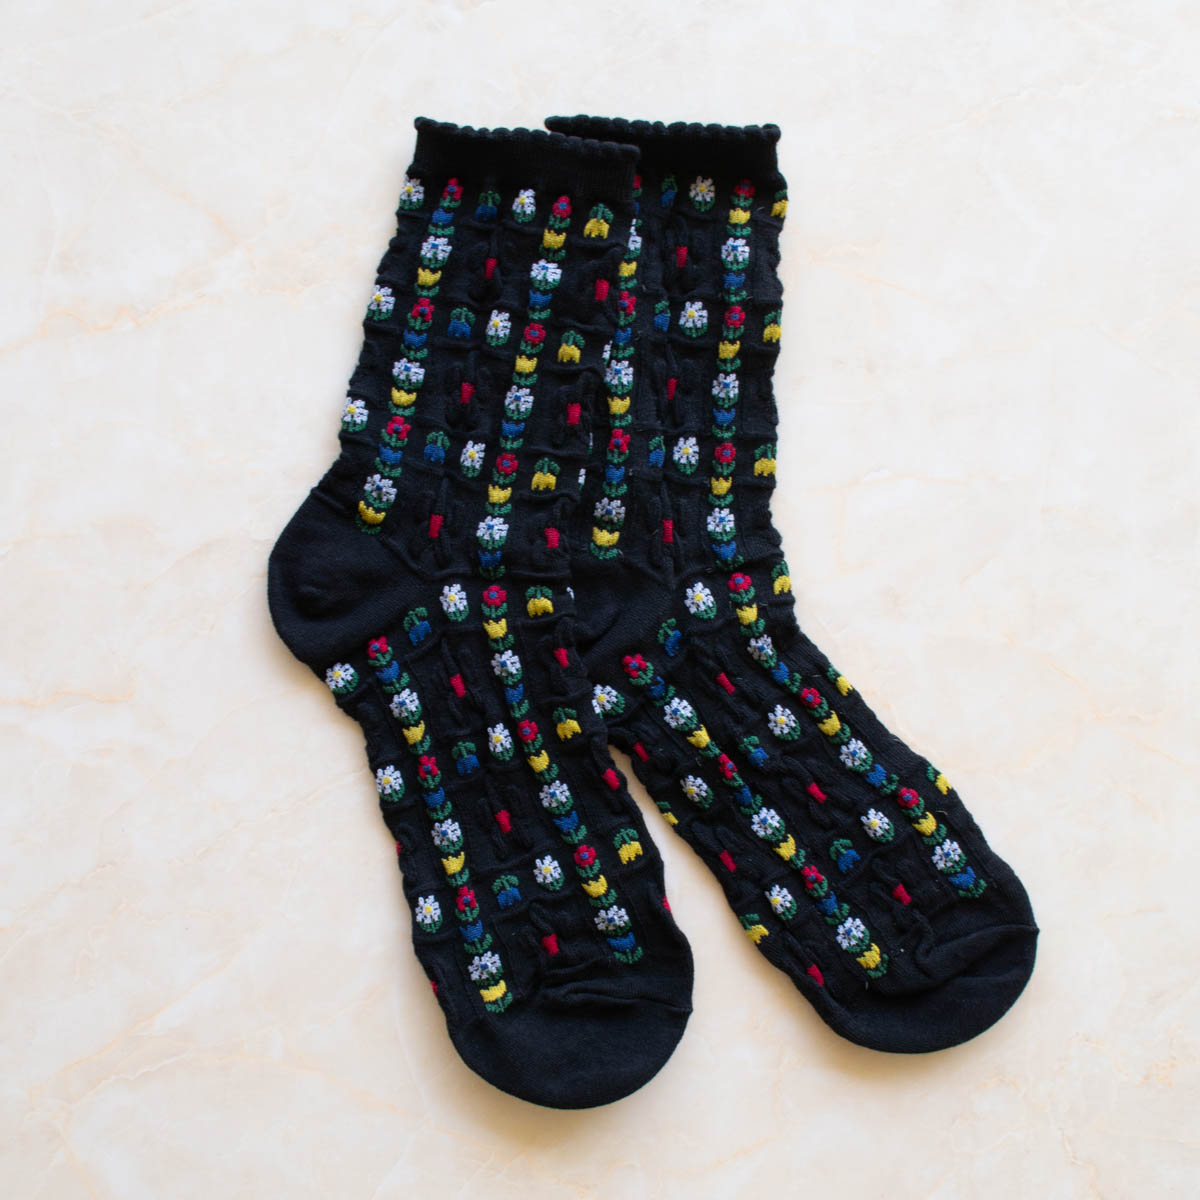 cotton knit socks in black with an allover red, yellow, green, blue, and white daisy and tulip knit-in pattern